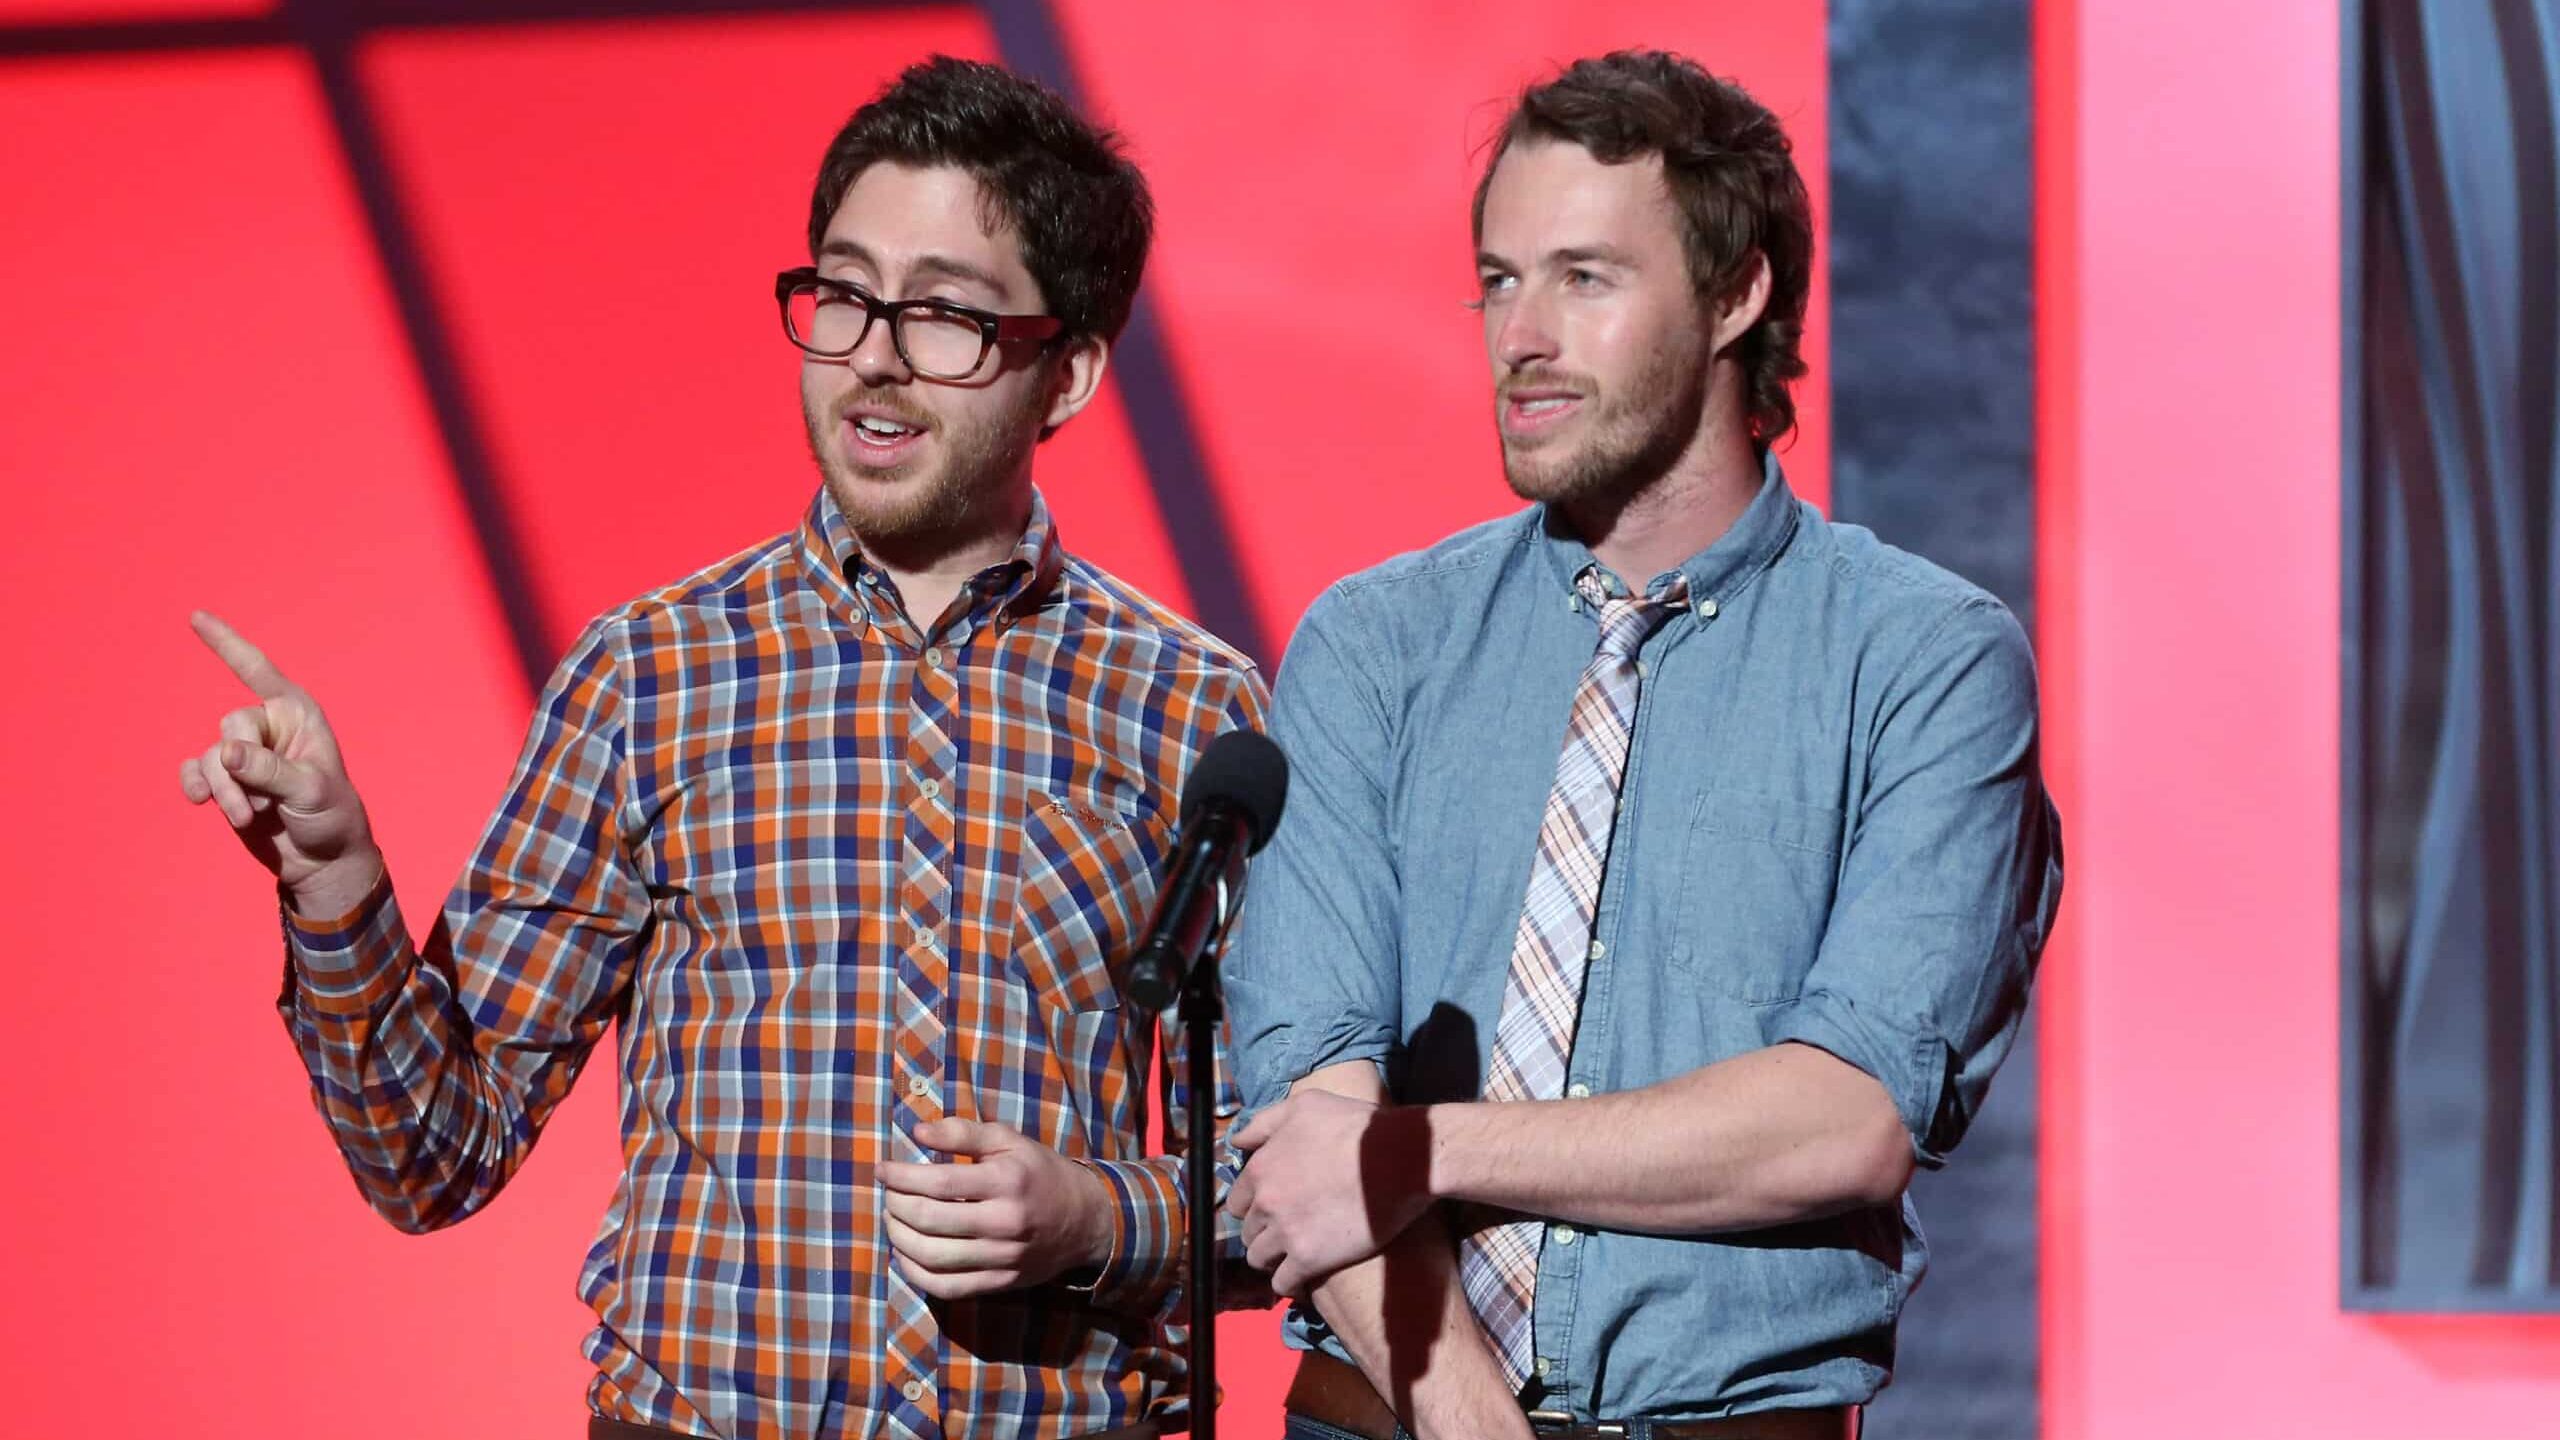 Presenters Amir Blumenfeld (L) and Jake Hurwitz speak onstage at the 3rd Annual Streamy Awards at Hollywood Palladium on February 17, 2013 in Hollywood, California.